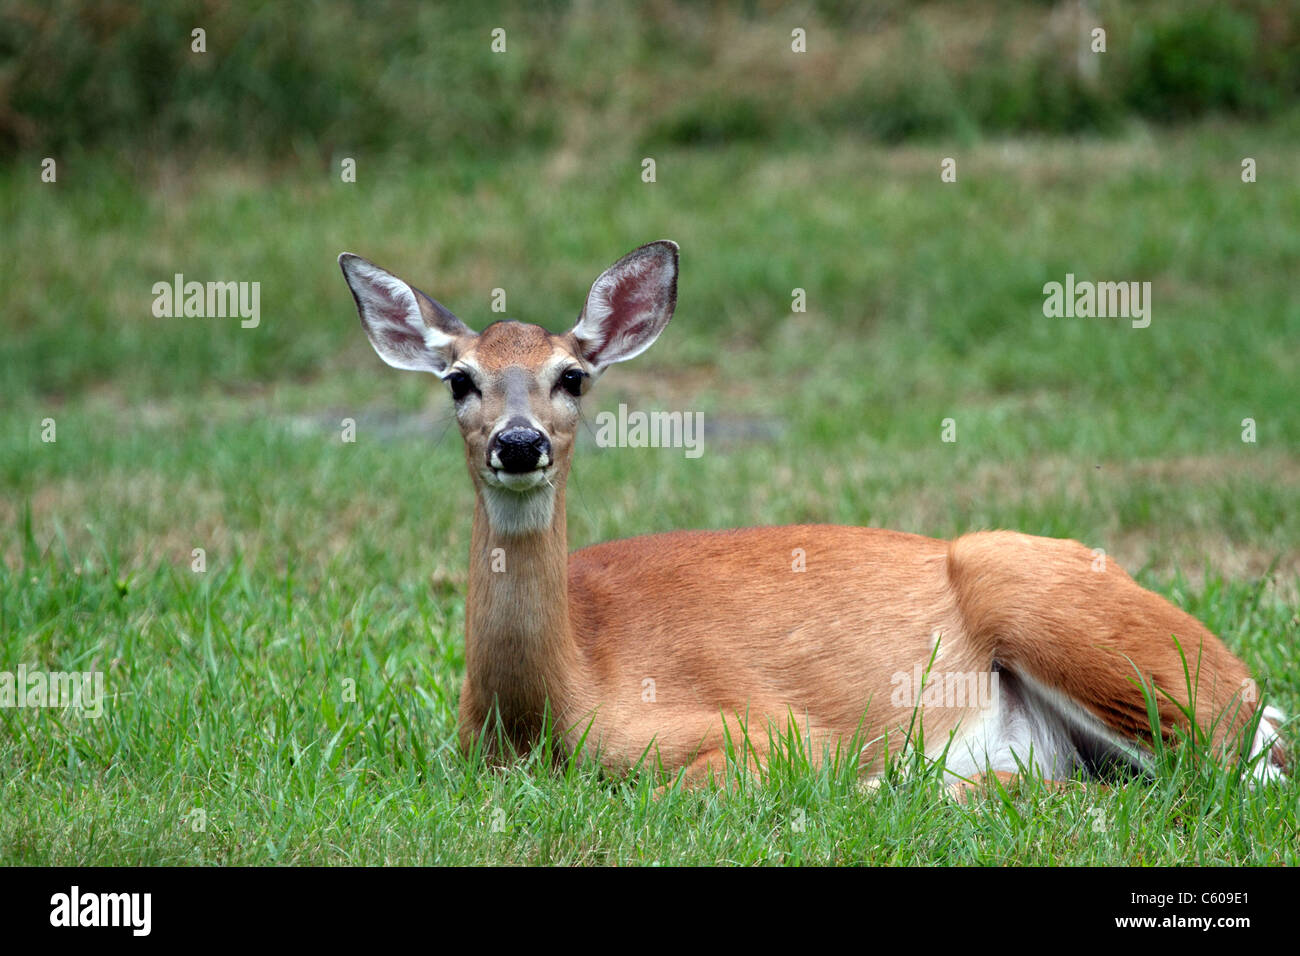 A Whitetail Deer Doe, Odocoileus virginianus, resting in the grass. Rifle Camp Park, Woodland Park, New Jersey, USA Stock Photo